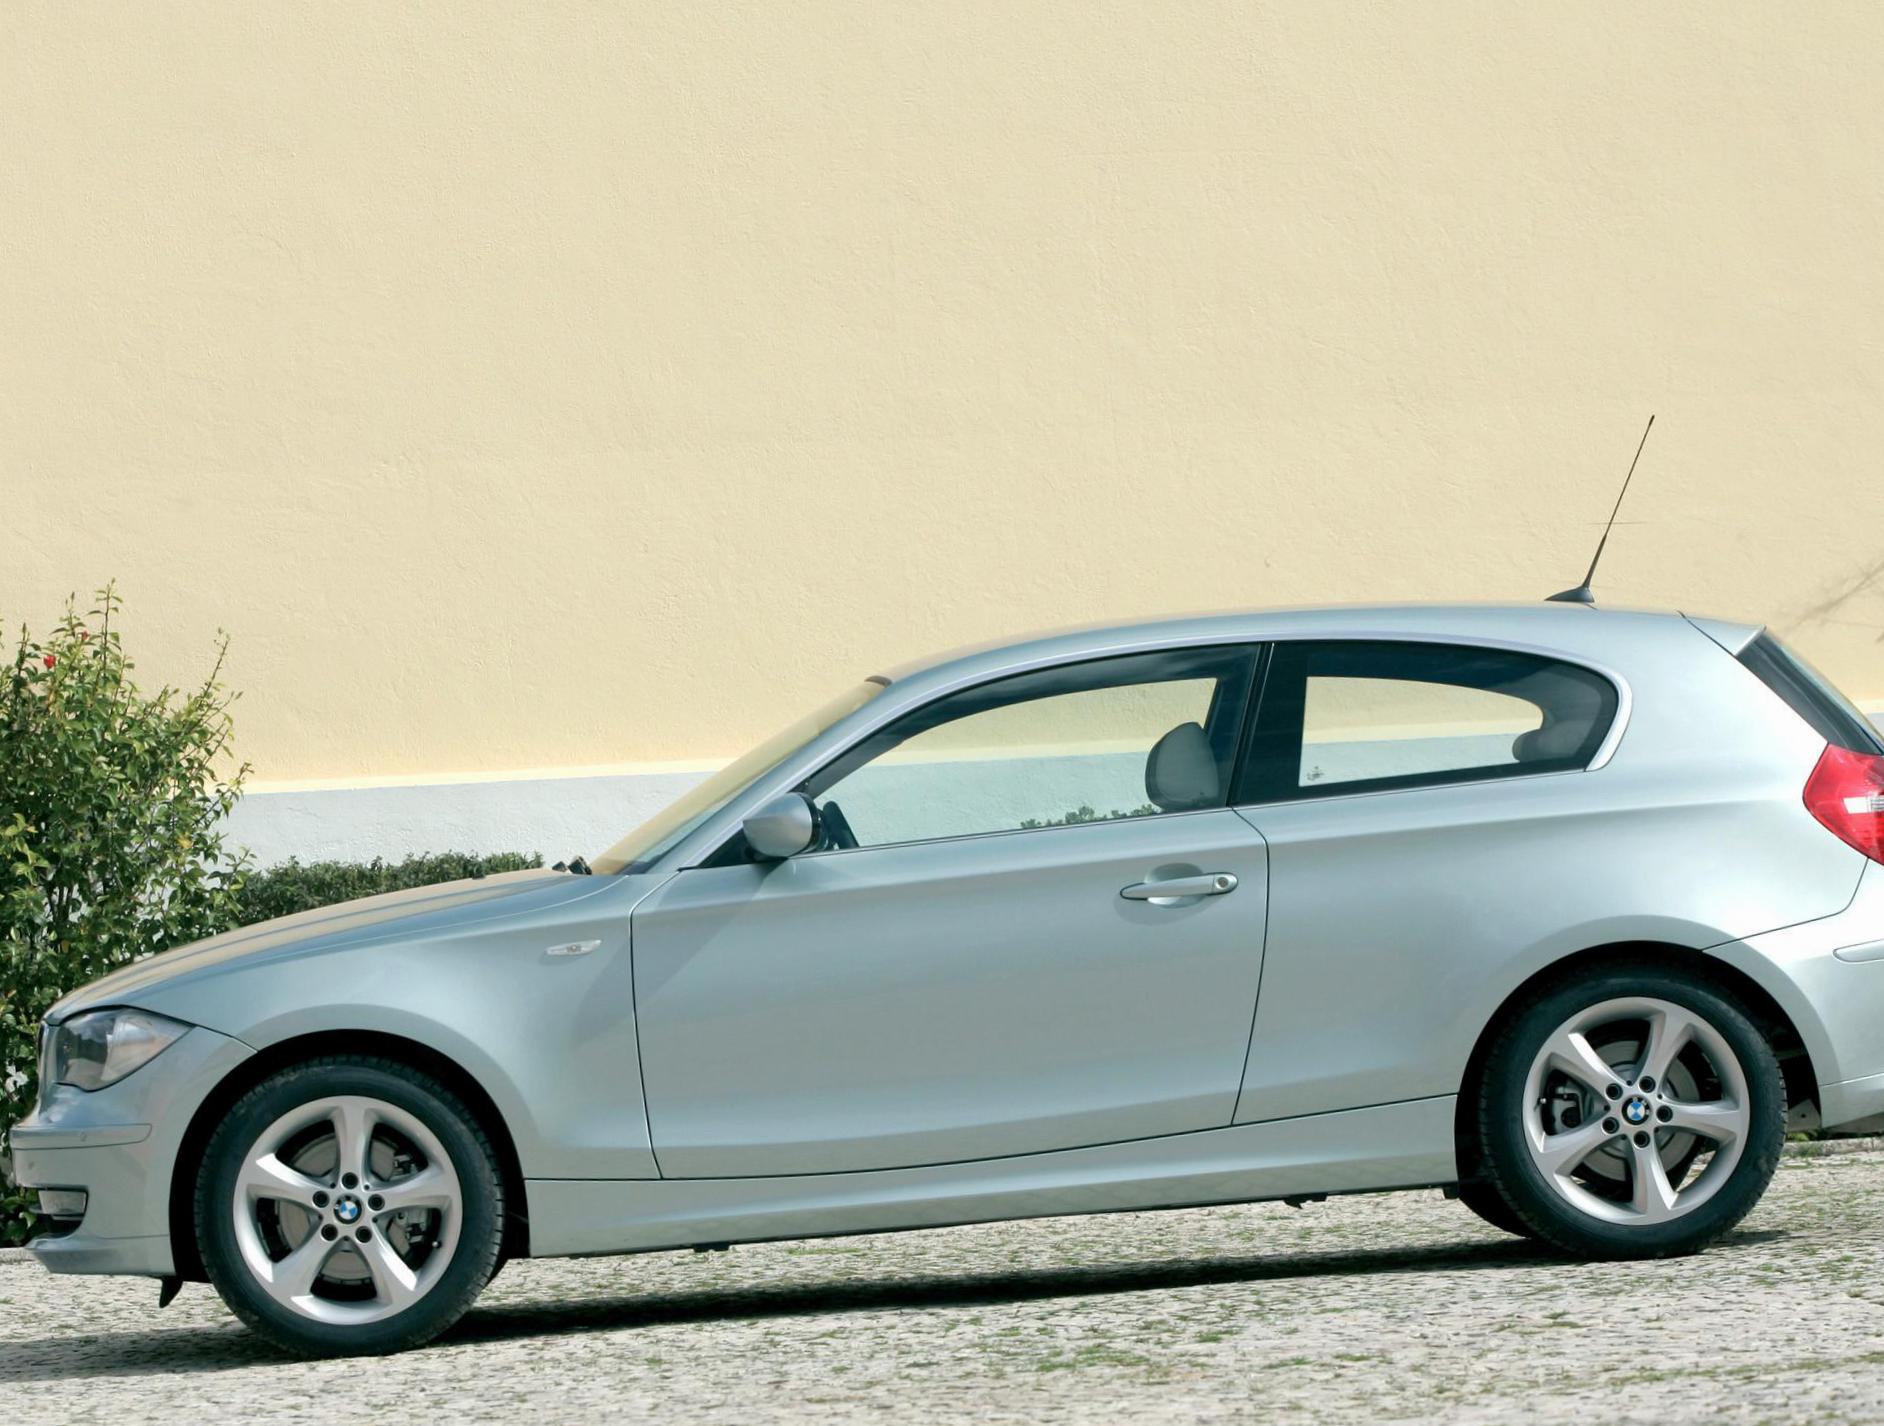 BMW 1 Series 3 doors (E81) for sale 2015